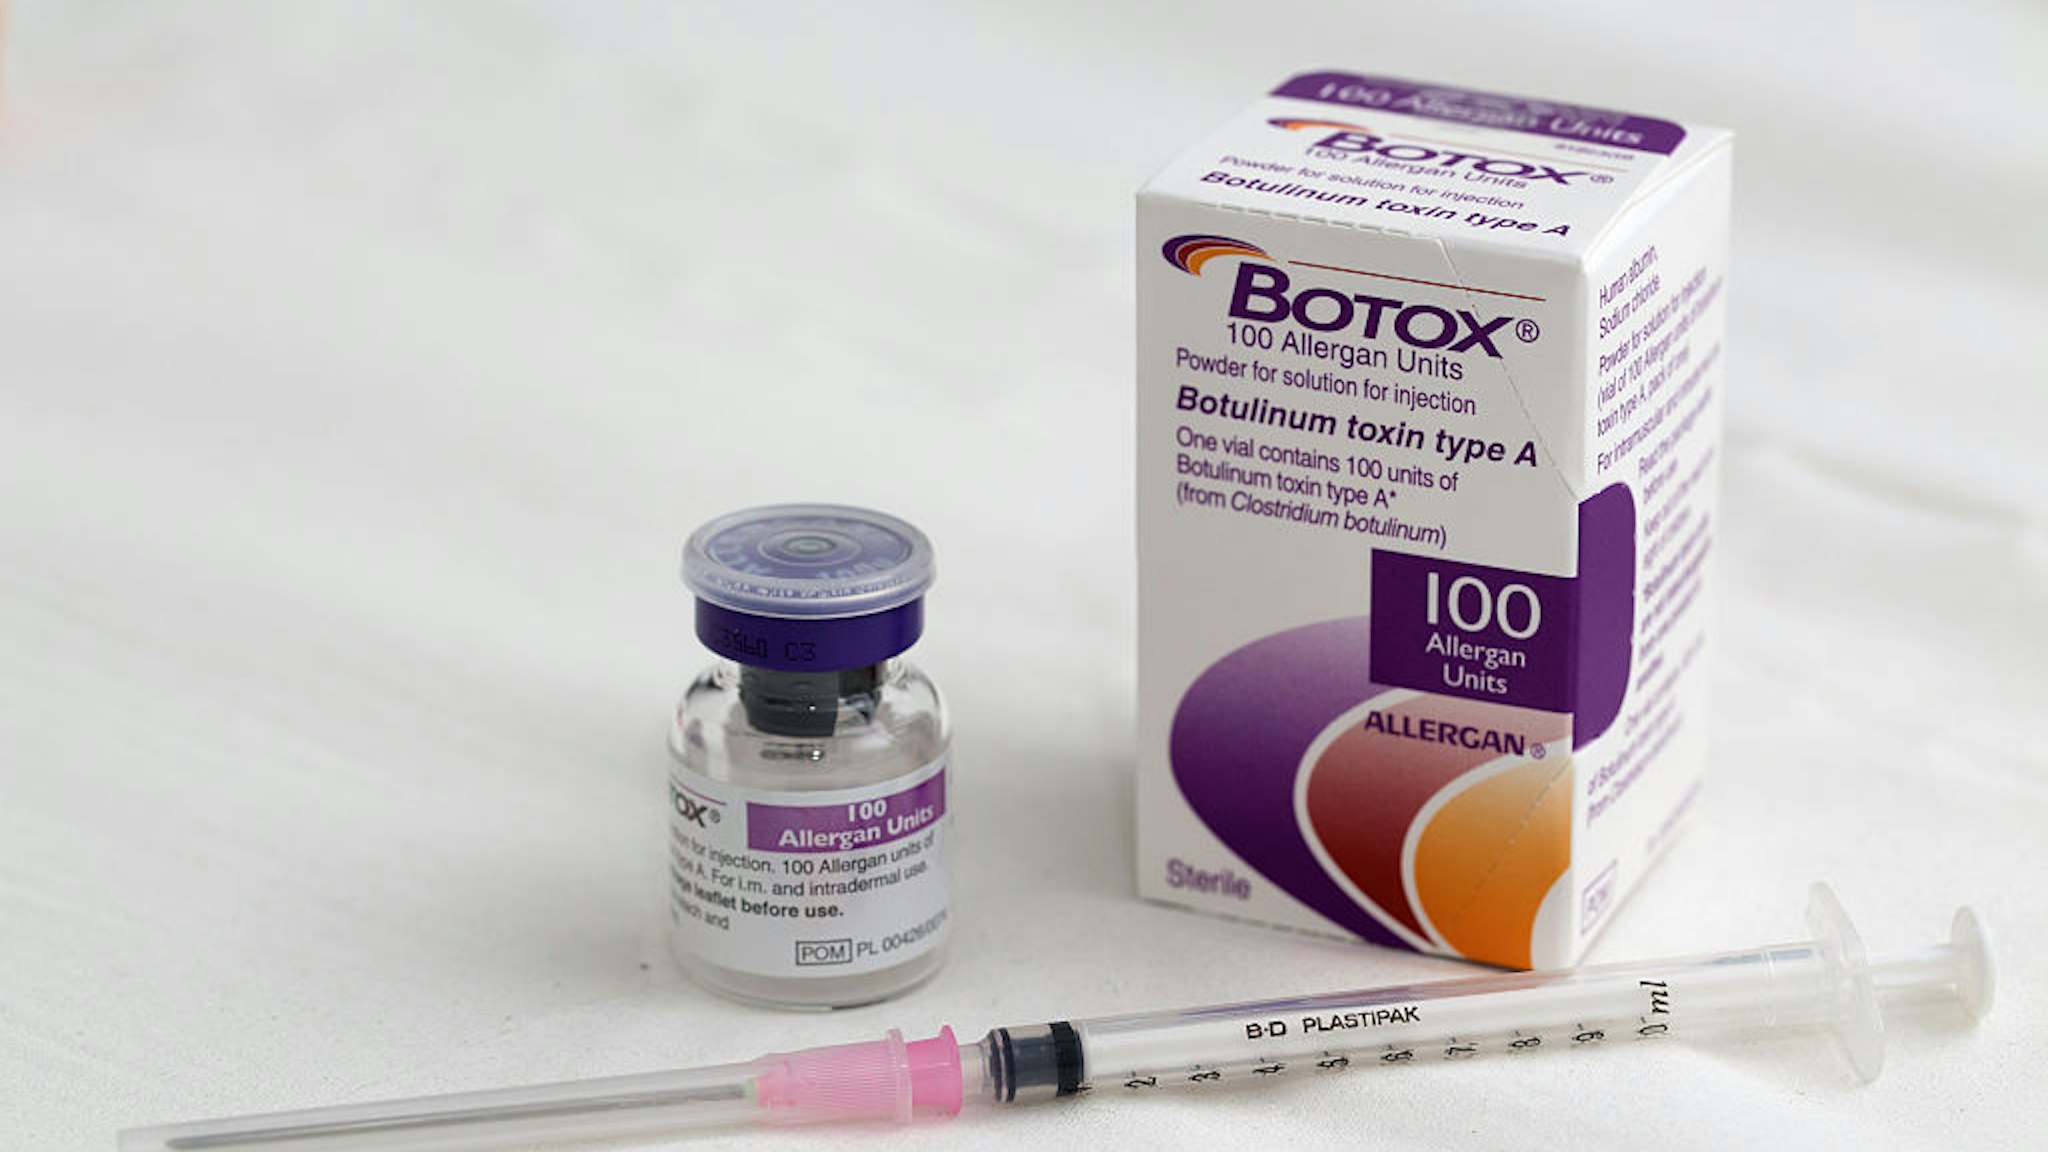 A syringe rests alongside a vial of Allergan Botox, produced by Allergan Inc., in this arranged photograph taken at a skin and beauty clinic in London, U.K., on Monday, Nov. 17, 2014.